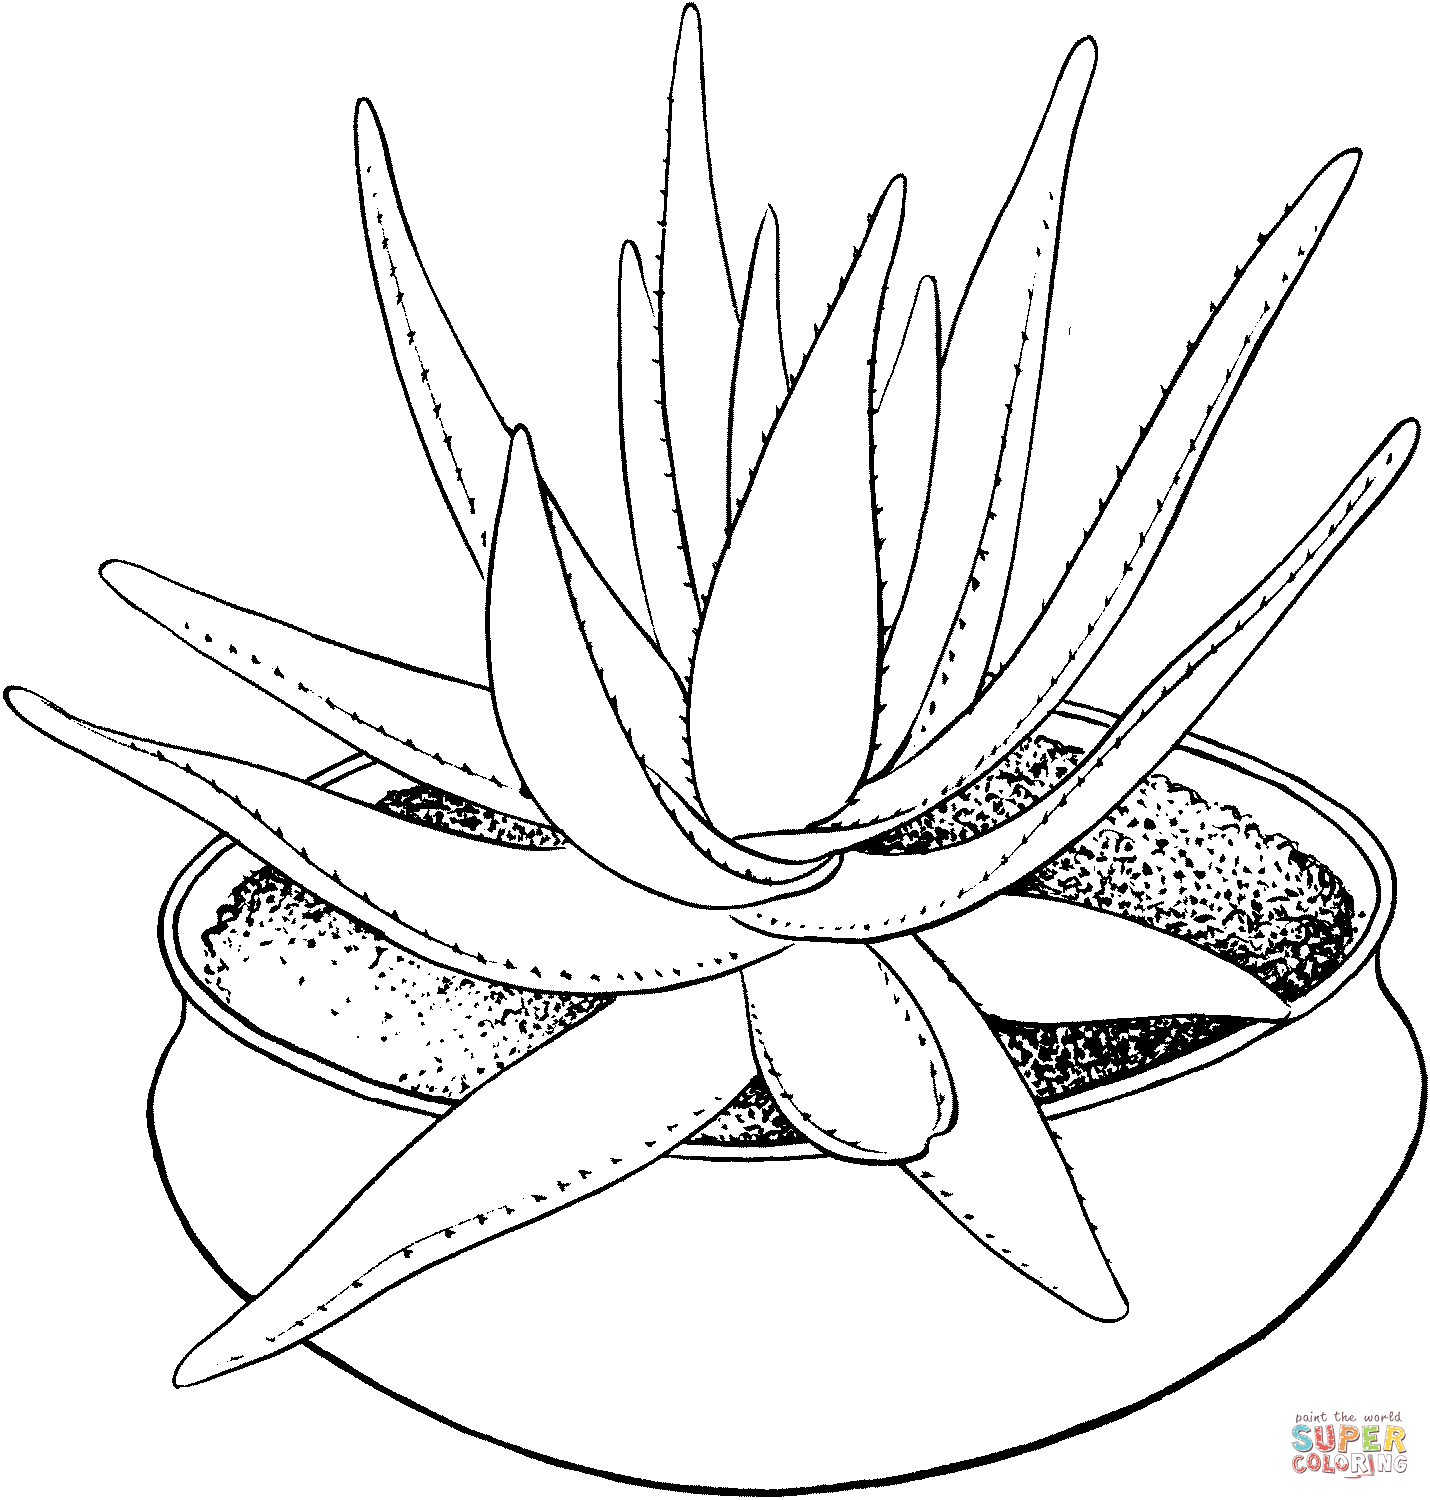 Bamboo houseplant coloring page | Free Printable Coloring Pages